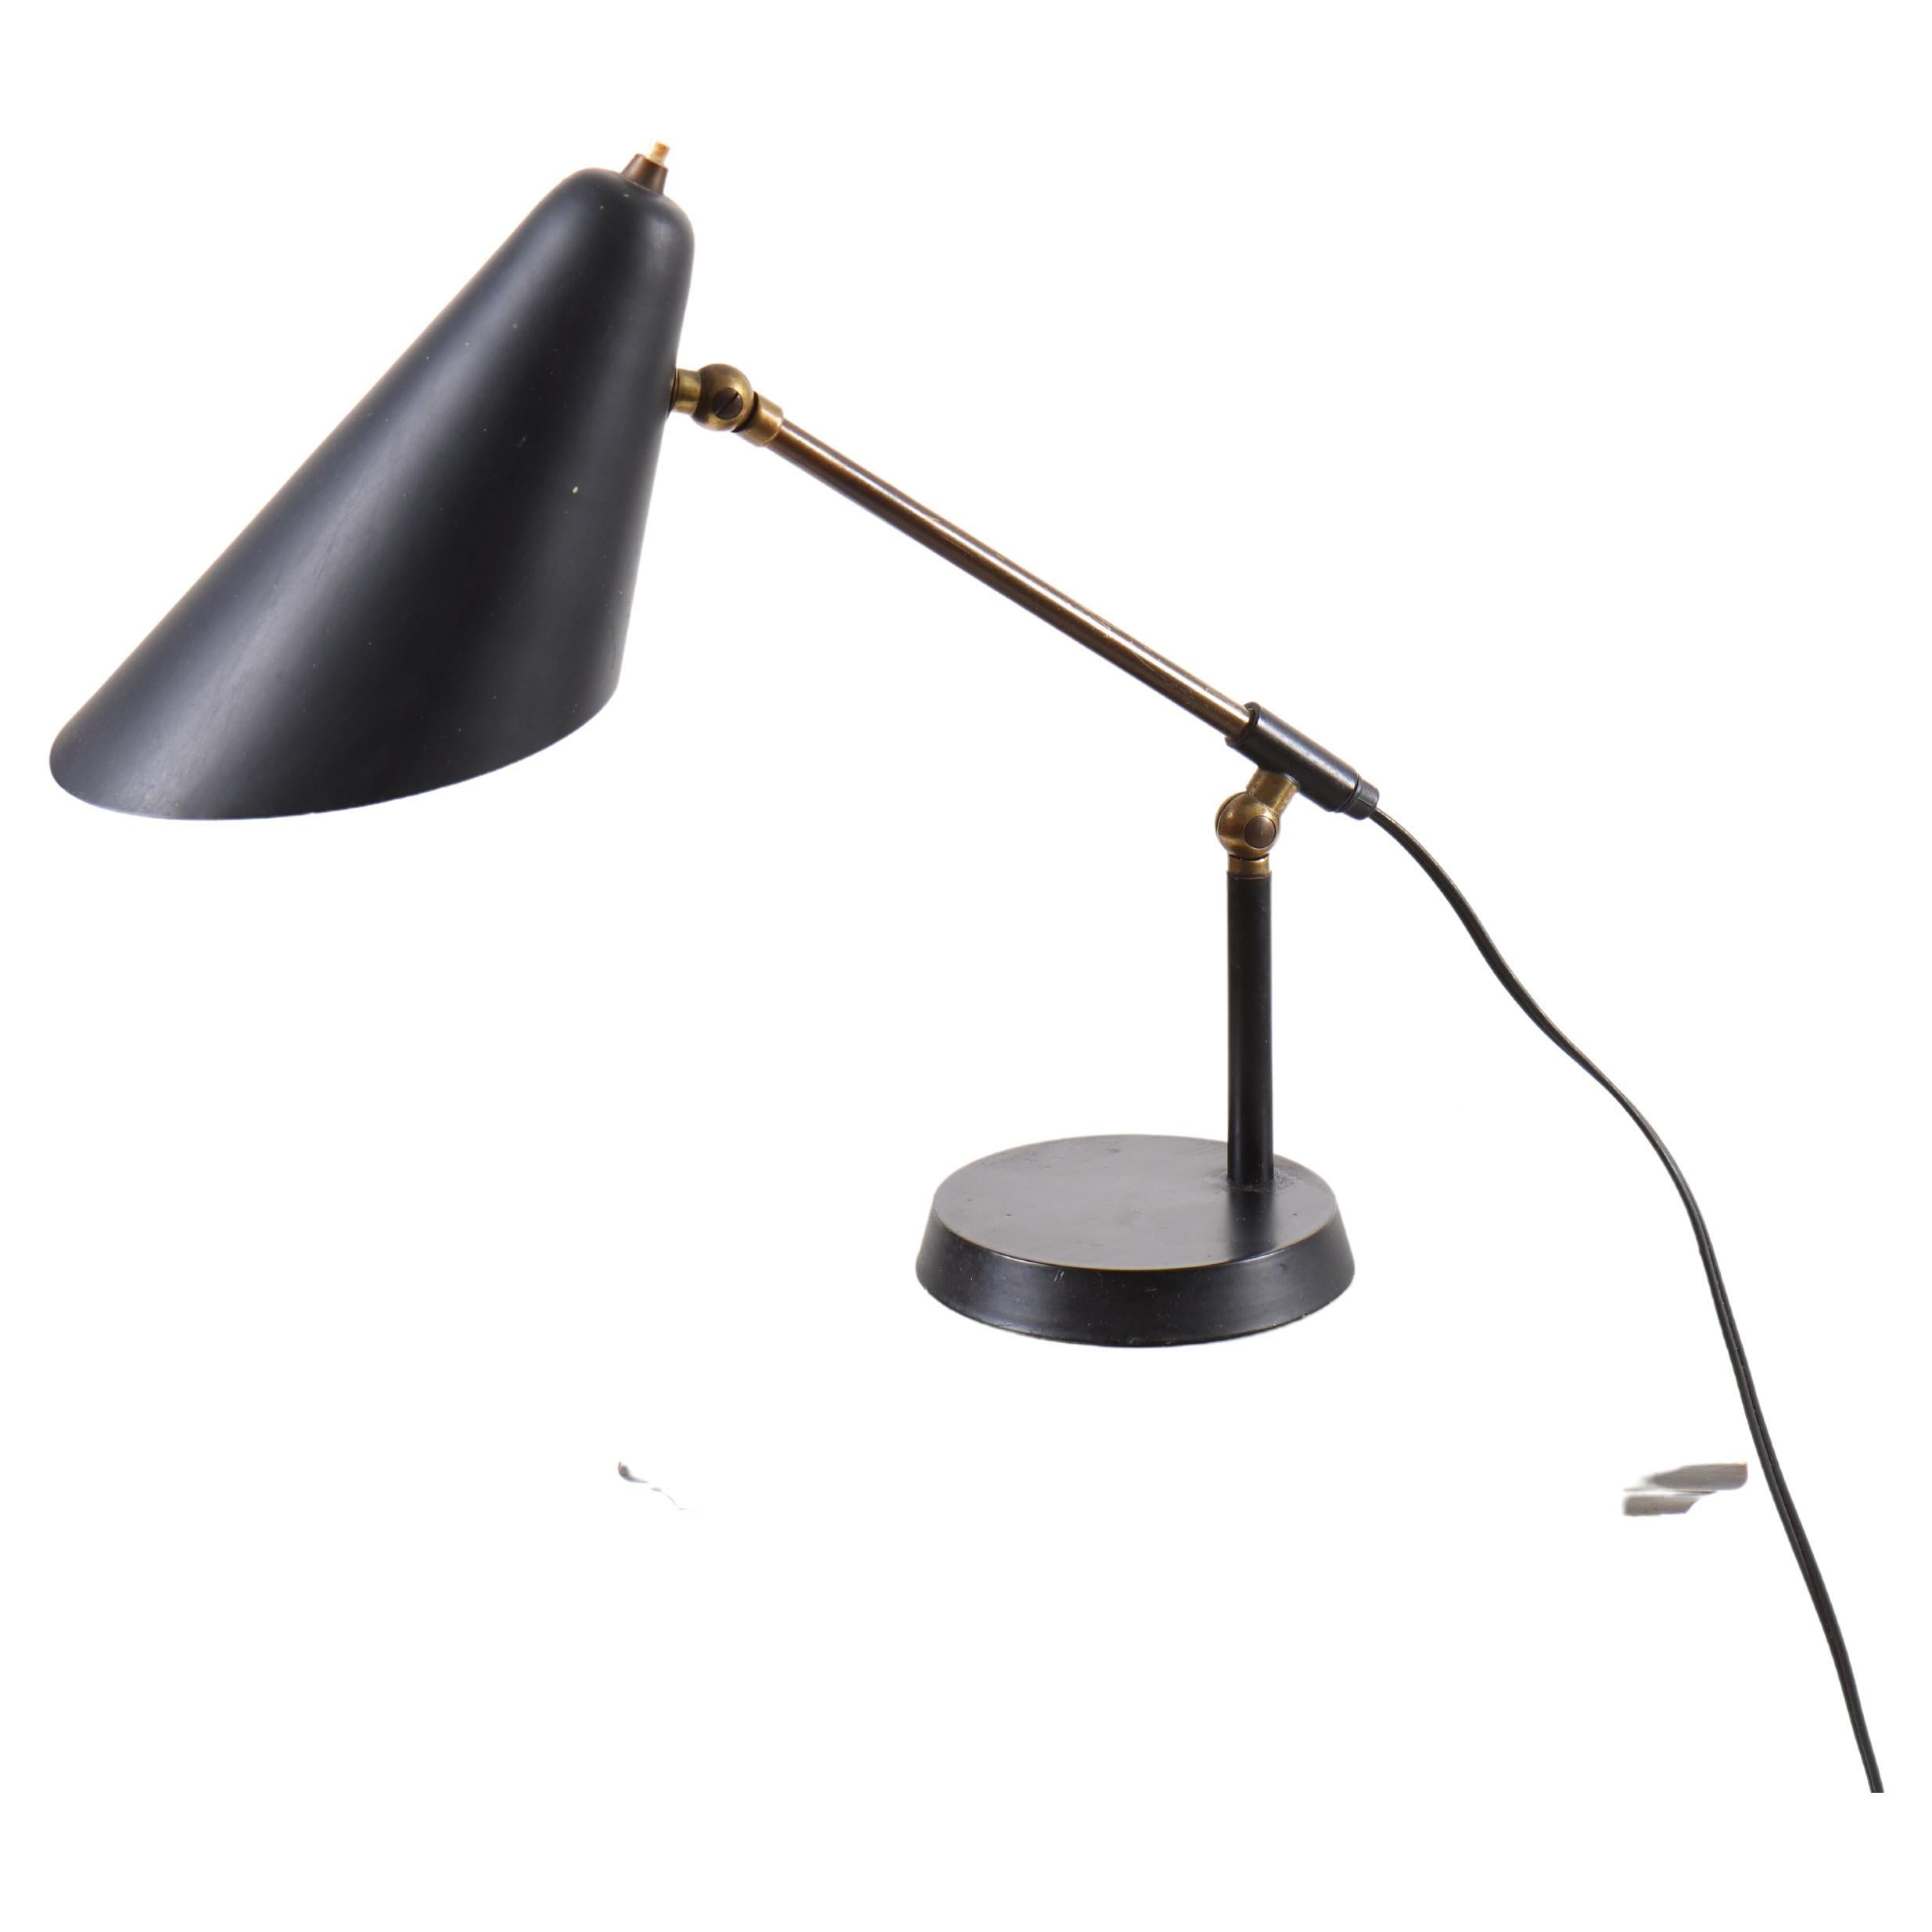 Midcentury Table Lamp with Brass Details, Made in Denmark, 1950s